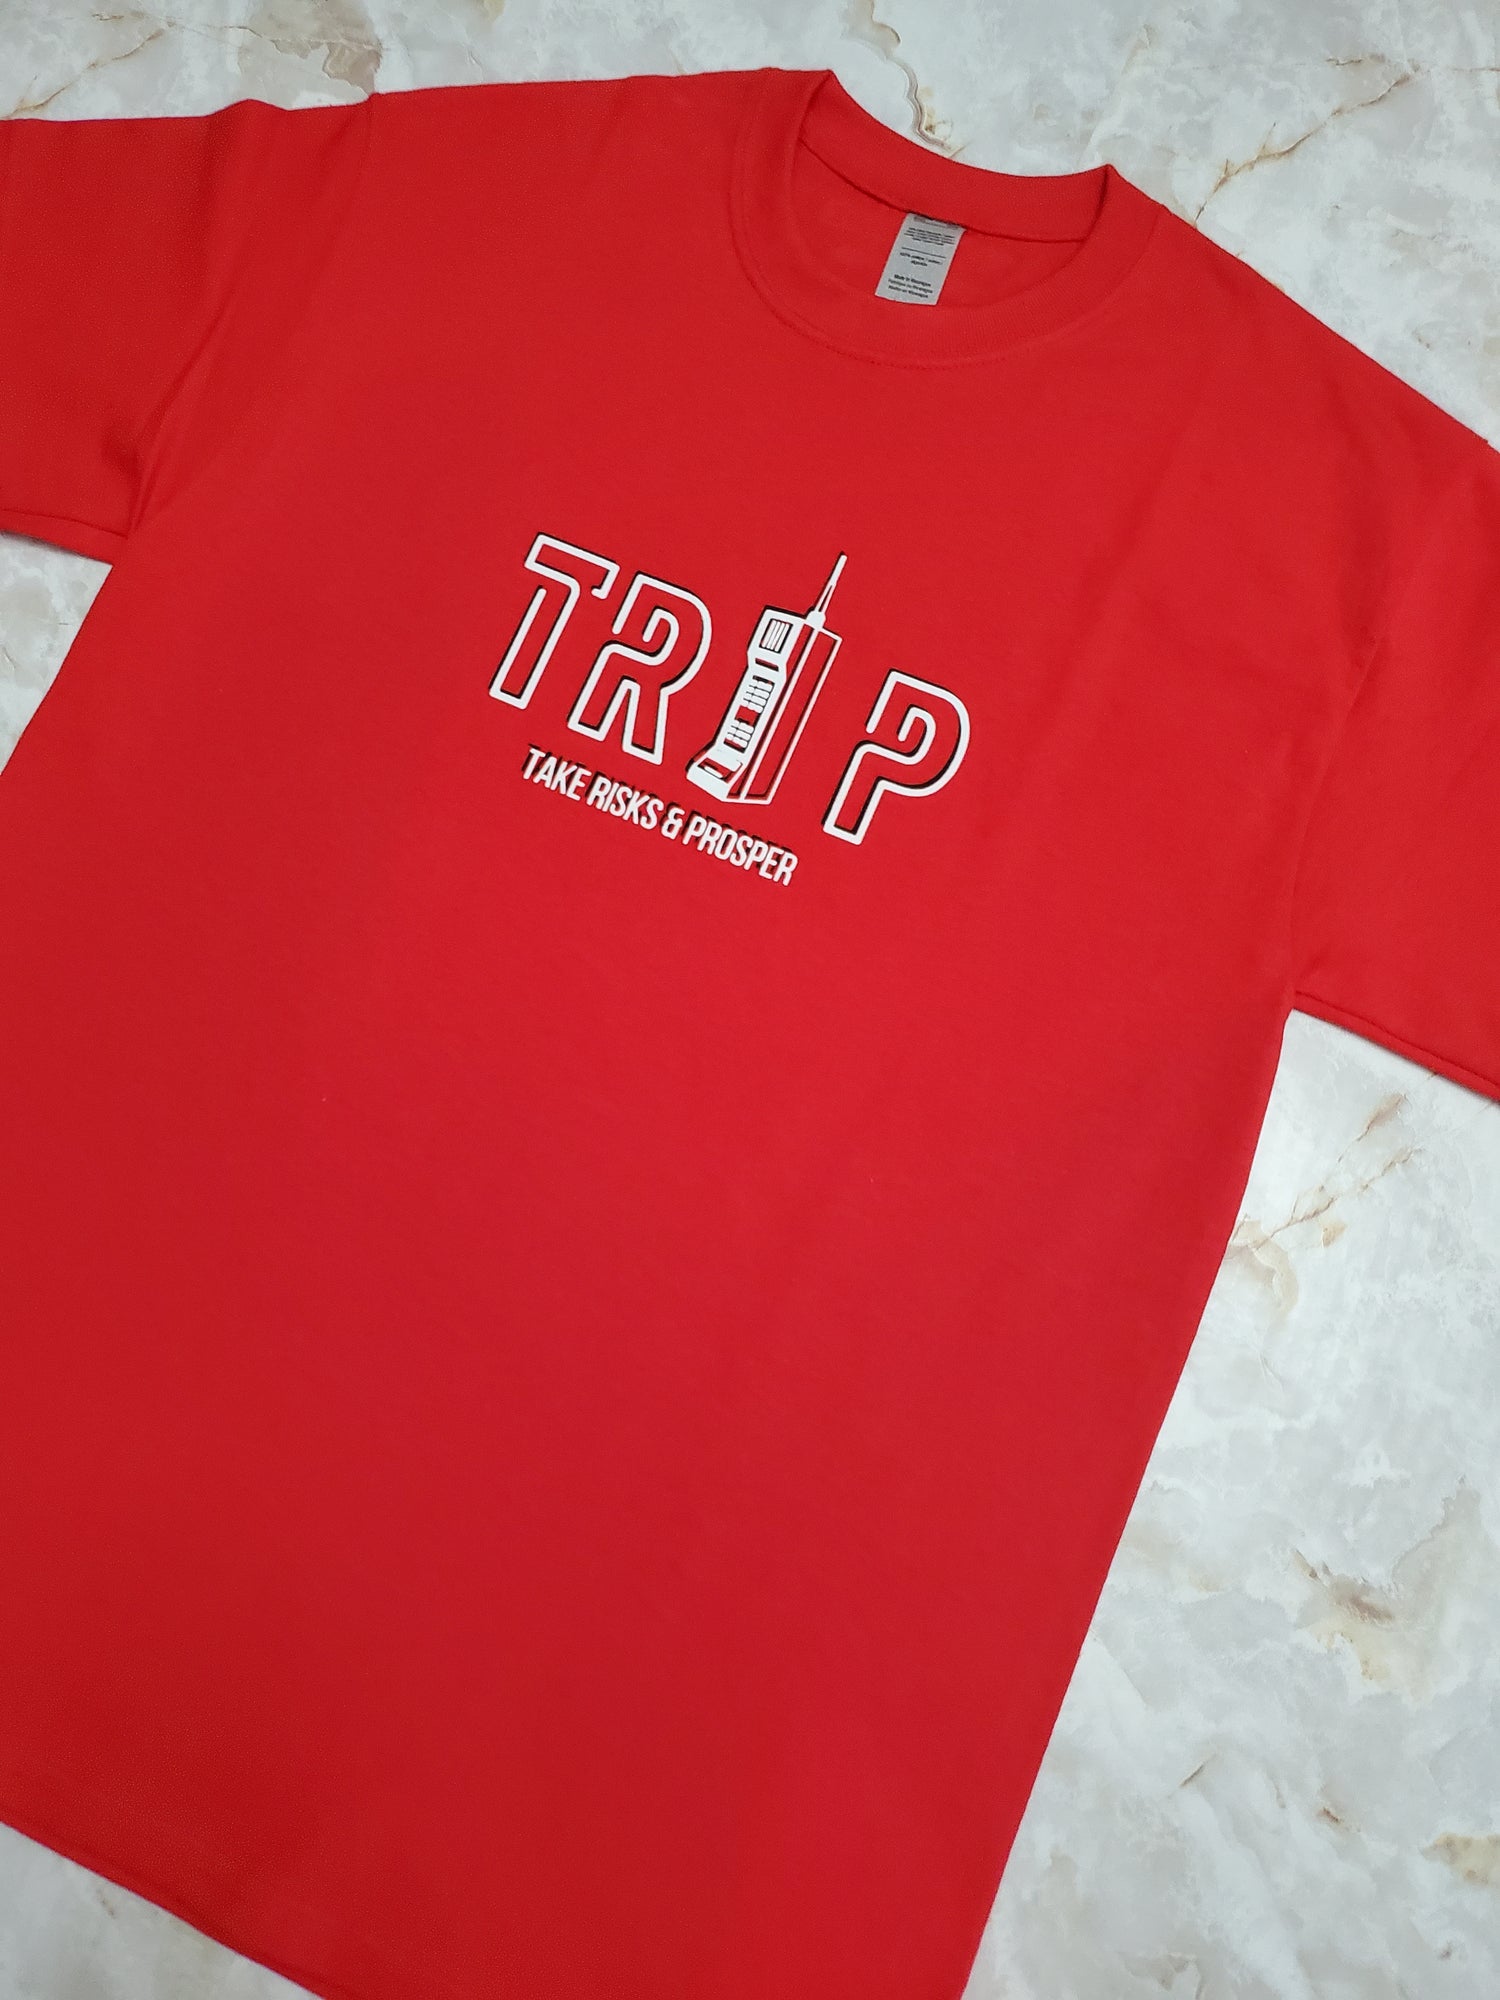 T.R.A.P T-Shirt - Centre Ave Clothing Co.